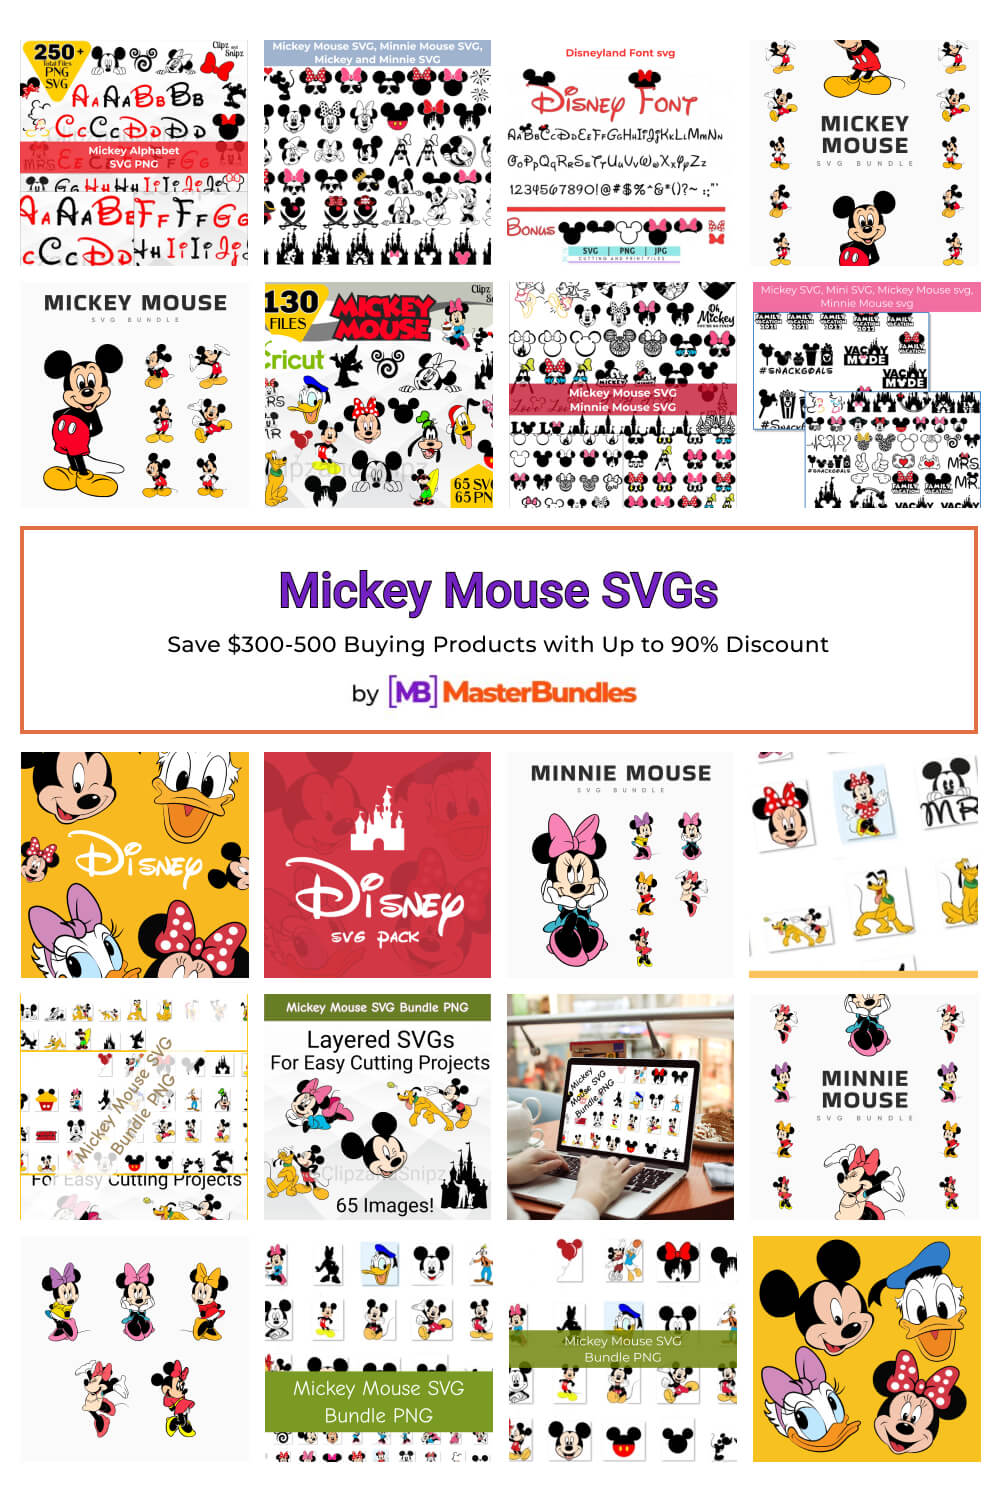 mickey mouse svgs pinterest image.